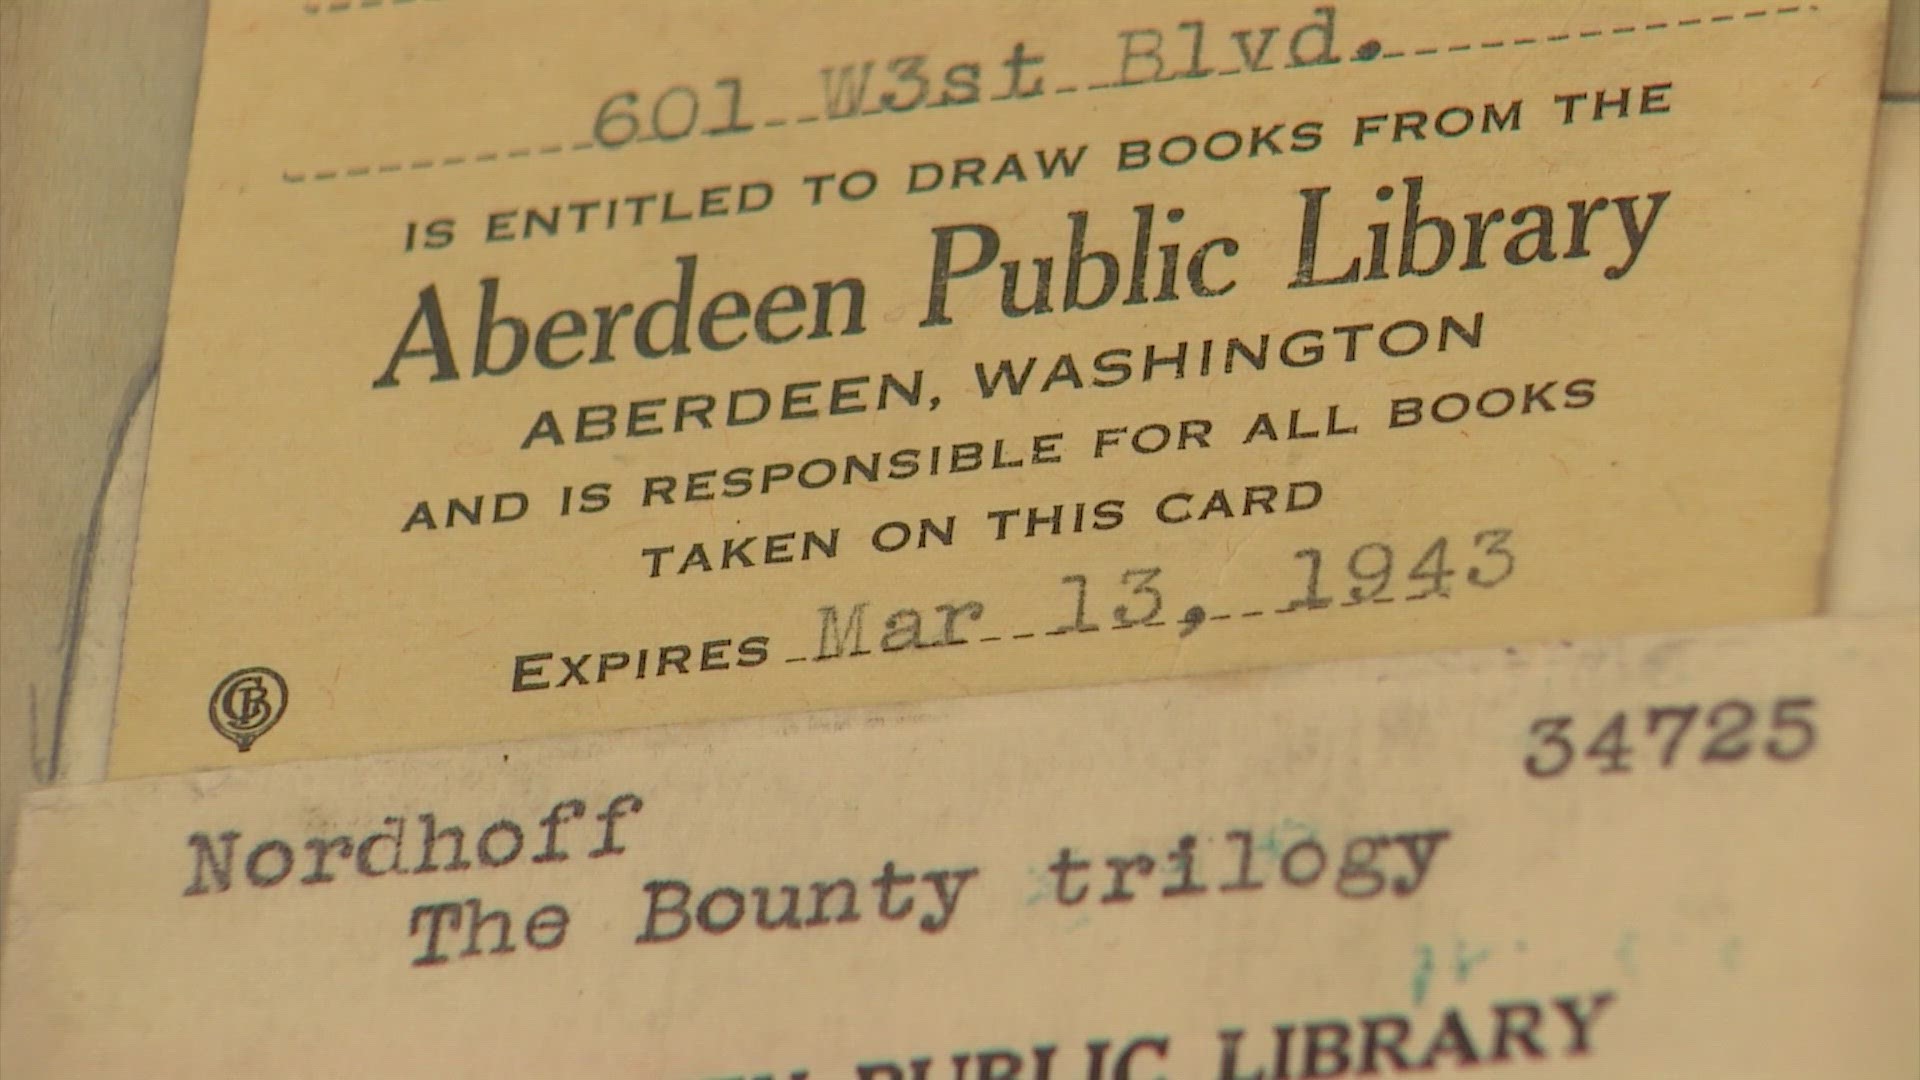 The book was due at the Aberdeen library on March 30, 1942. It was returned on June 5, 2023.